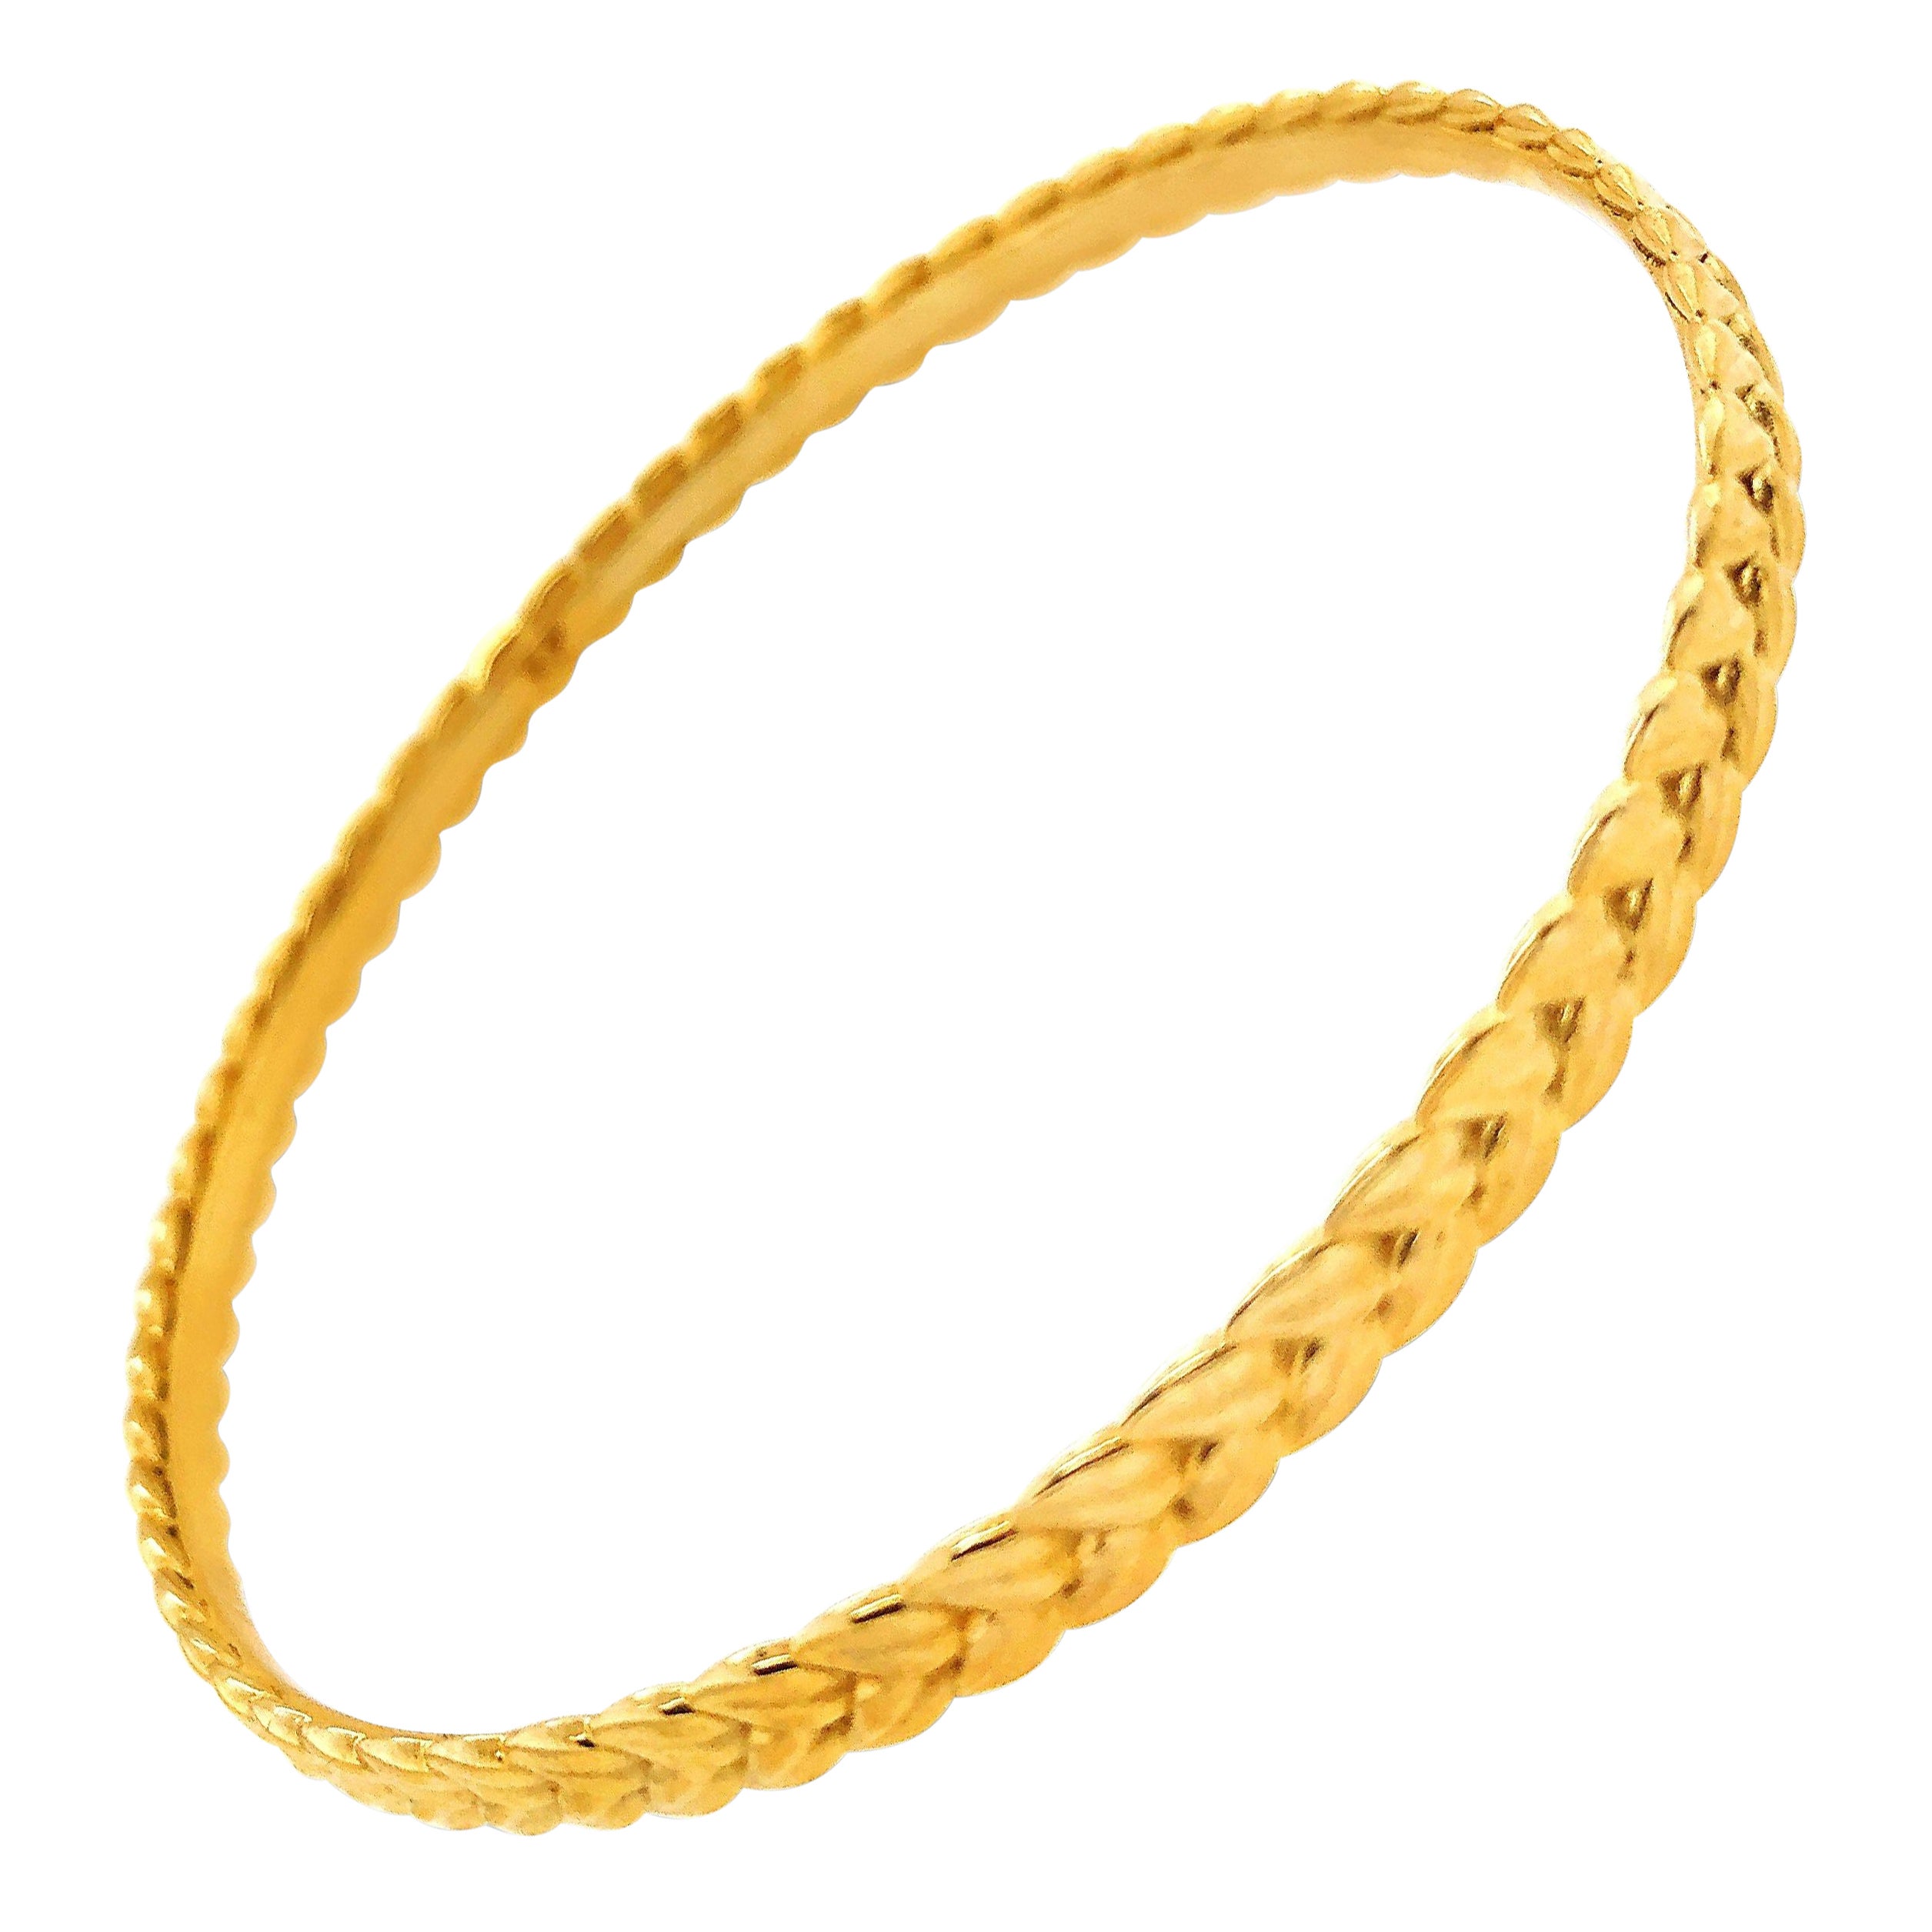 Wheat Sheaf Large Bangle Bracelet in 18Karat Yellow Gold Plated Brass For Sale